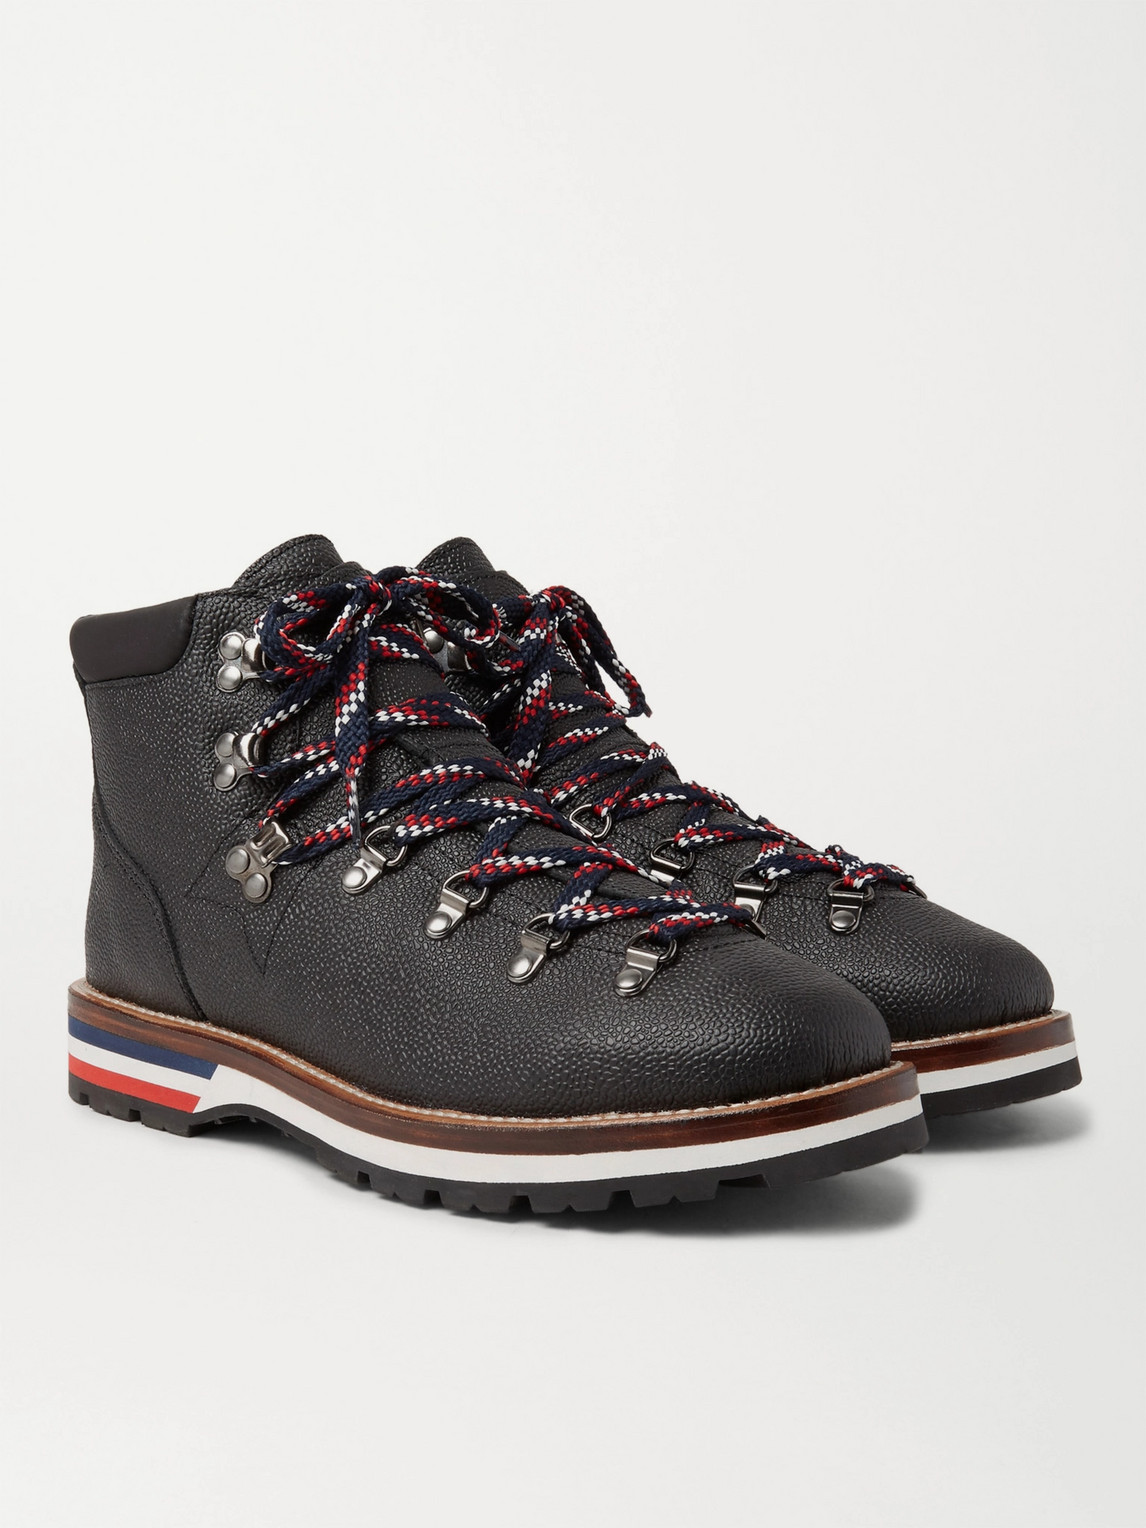 Moncler Peak Pebble-grain Leather Hiking Boots In Black